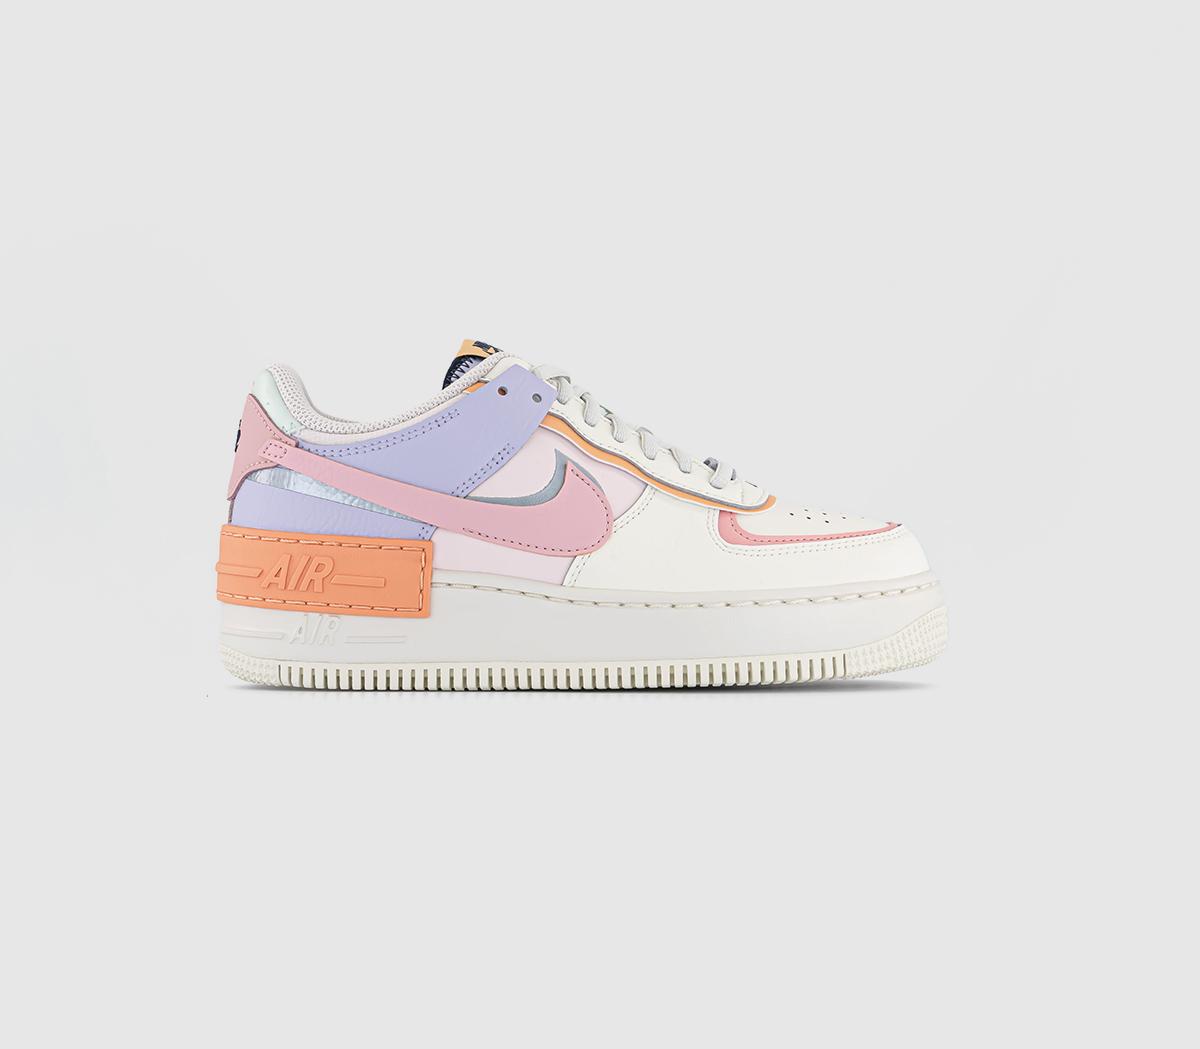 NikeAir Force 1 Shadow TrainersSail Pink Orange Chalk Obsidian Soft Pink Barely G